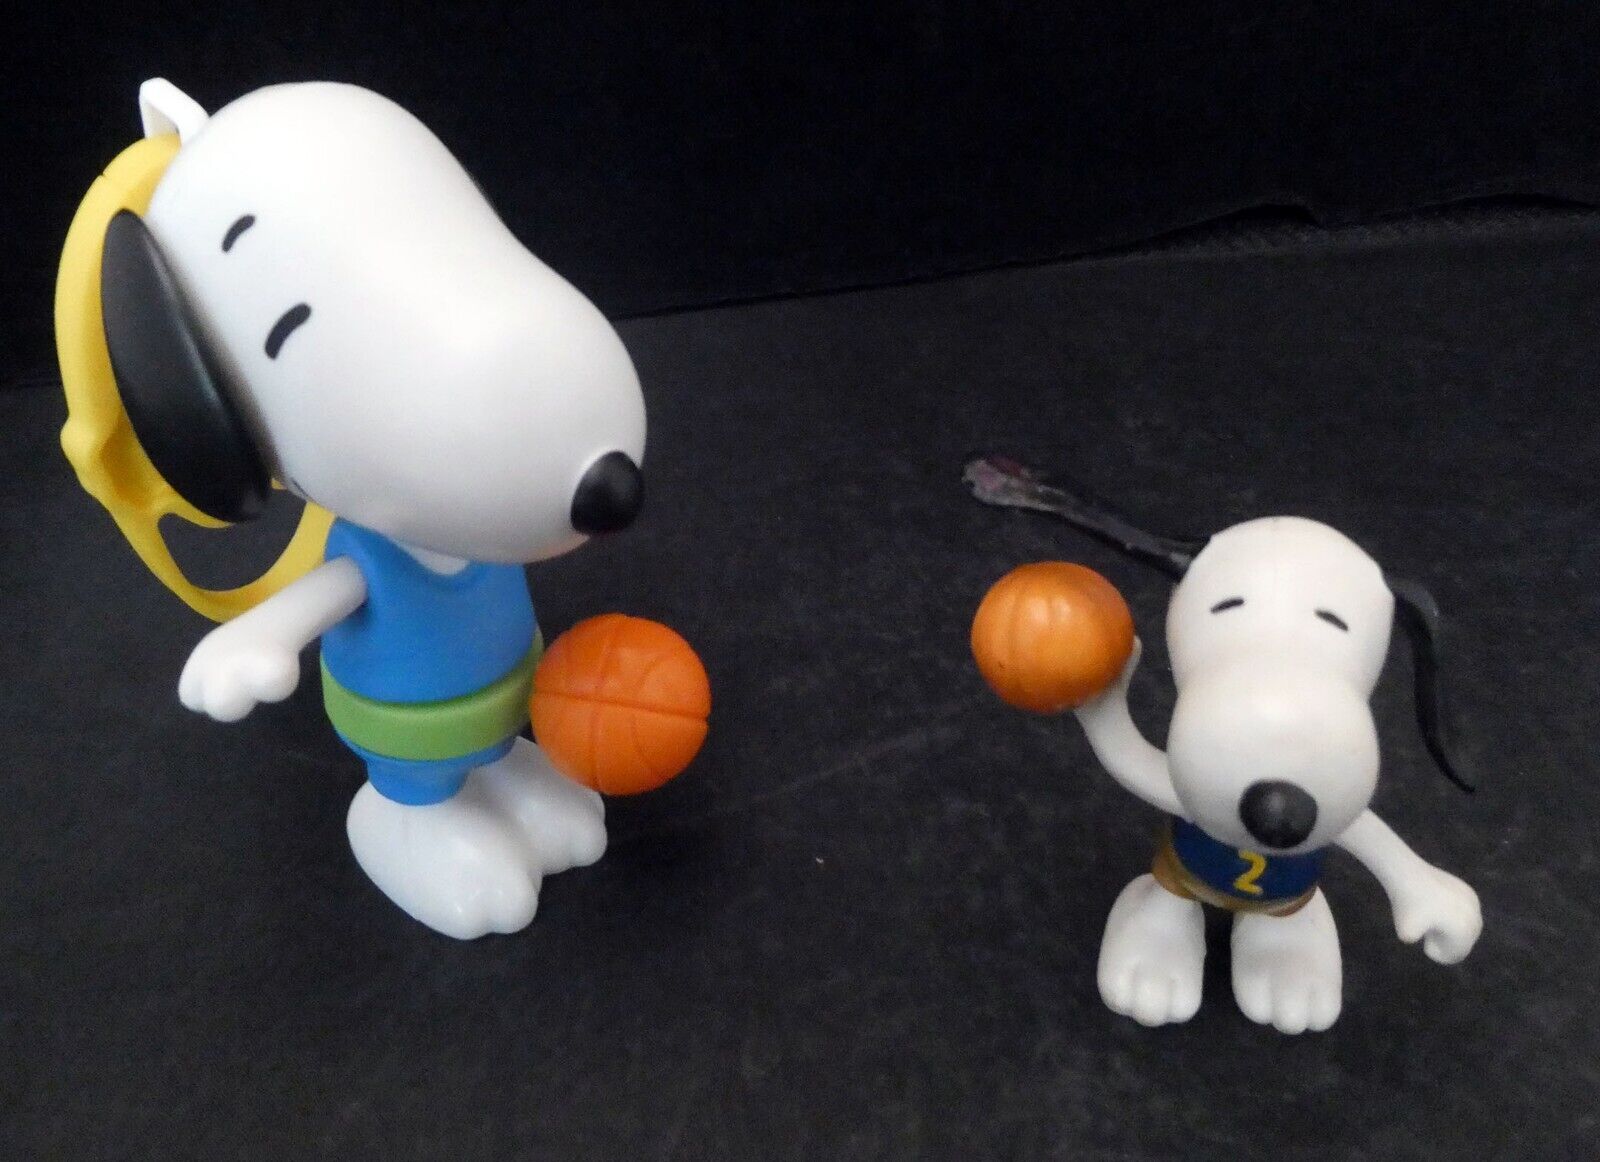 2 Snoopy Basketball 1 Key Chain Ball Goes Around When Button Pushed &Figurine #2